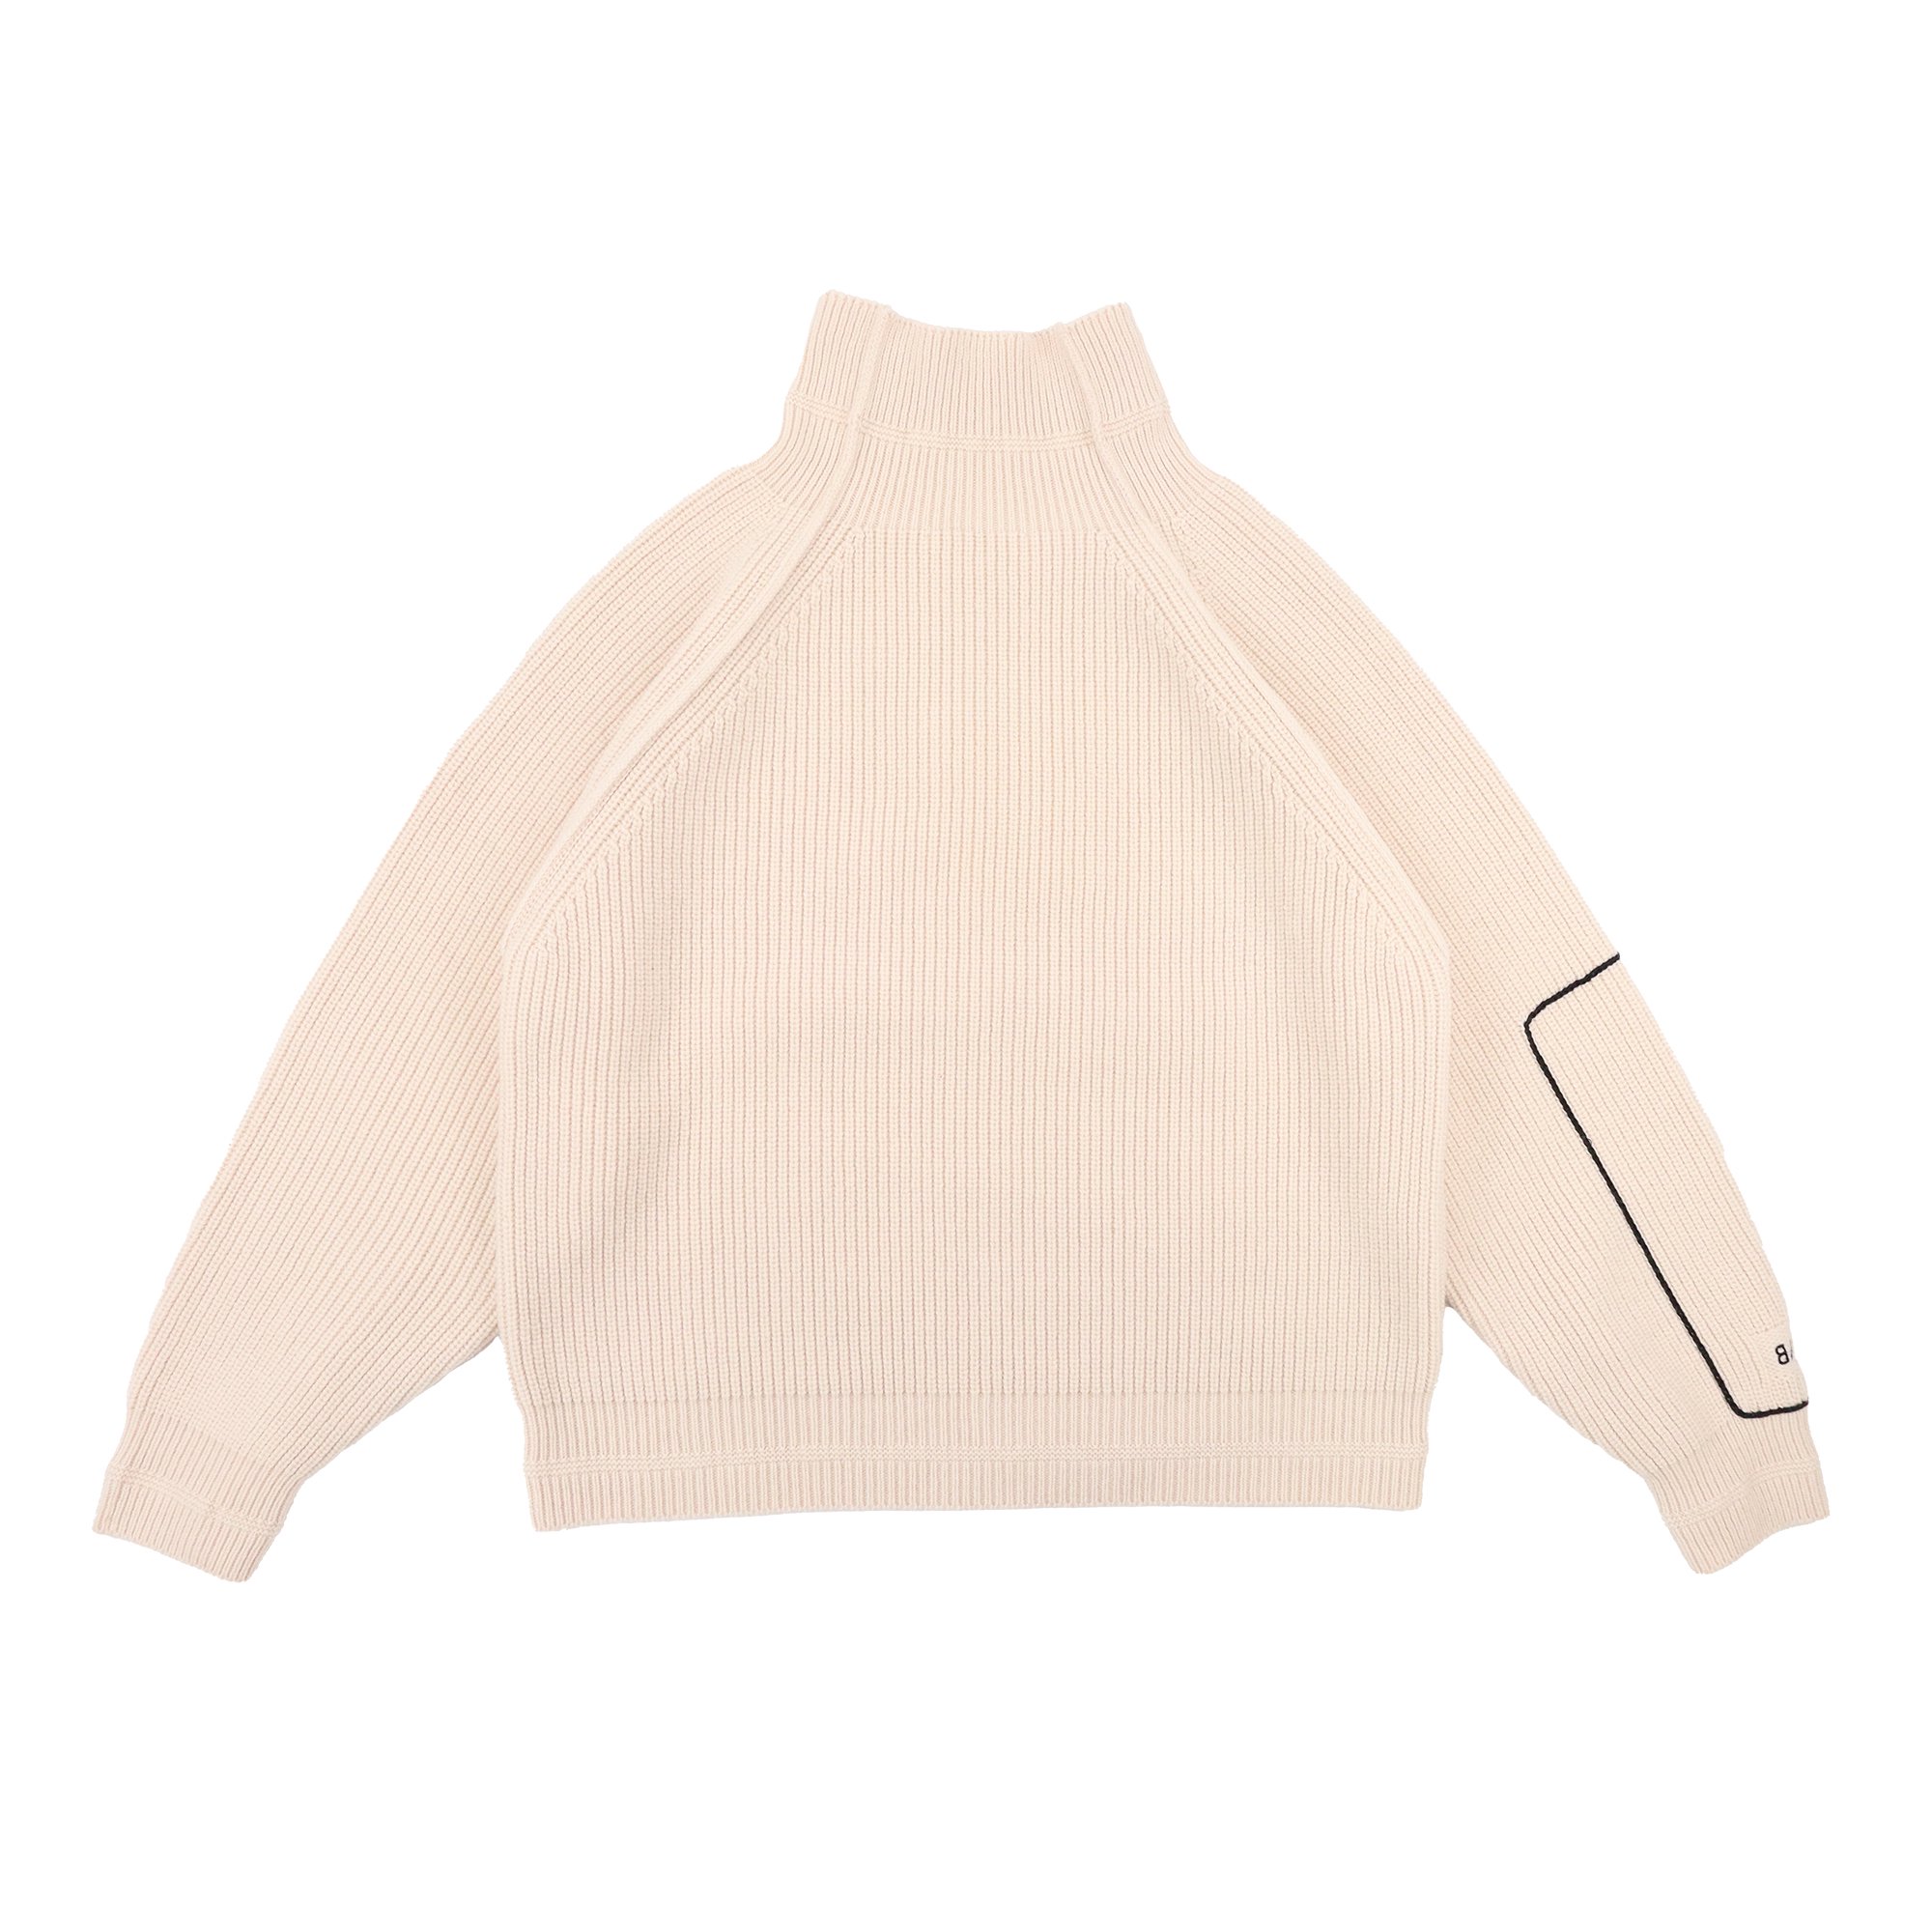 <img class='new_mark_img1' src='https://img.shop-pro.jp/img/new/icons23.gif' style='border:none;display:inline;margin:0px;padding:0px;width:auto;' />VICTORIA BECKHAM KNIT PULLOVERPINK